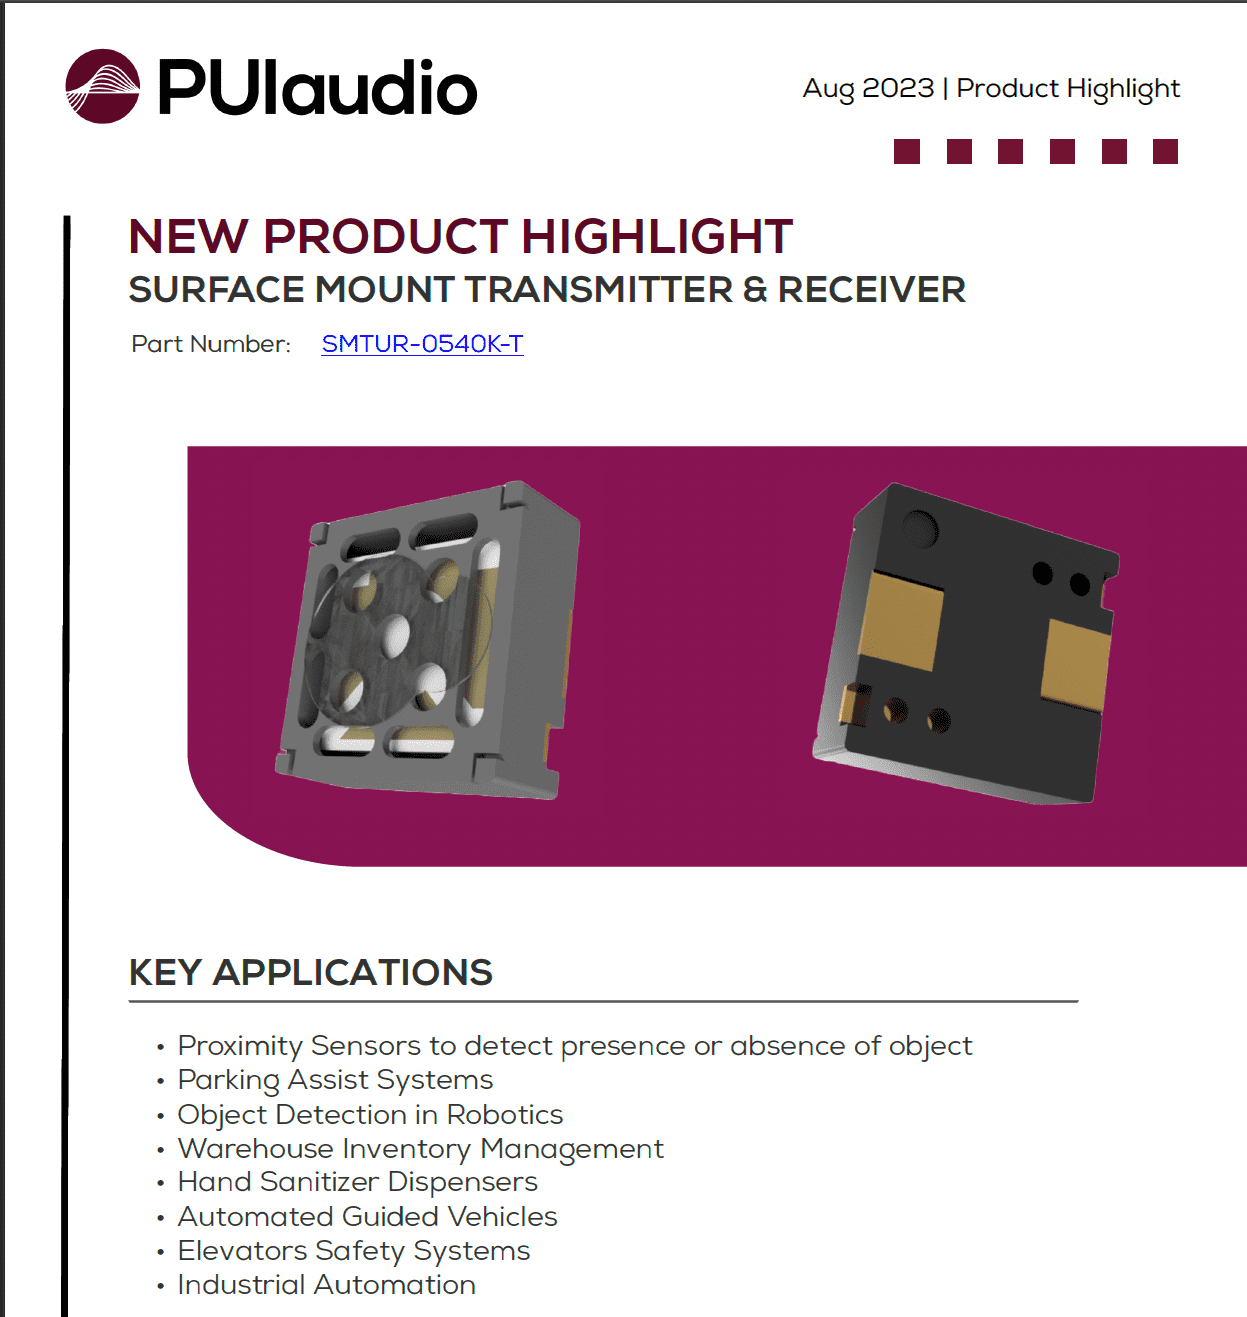 New Product Highlight – Surface Mount Transmitter & Receiver